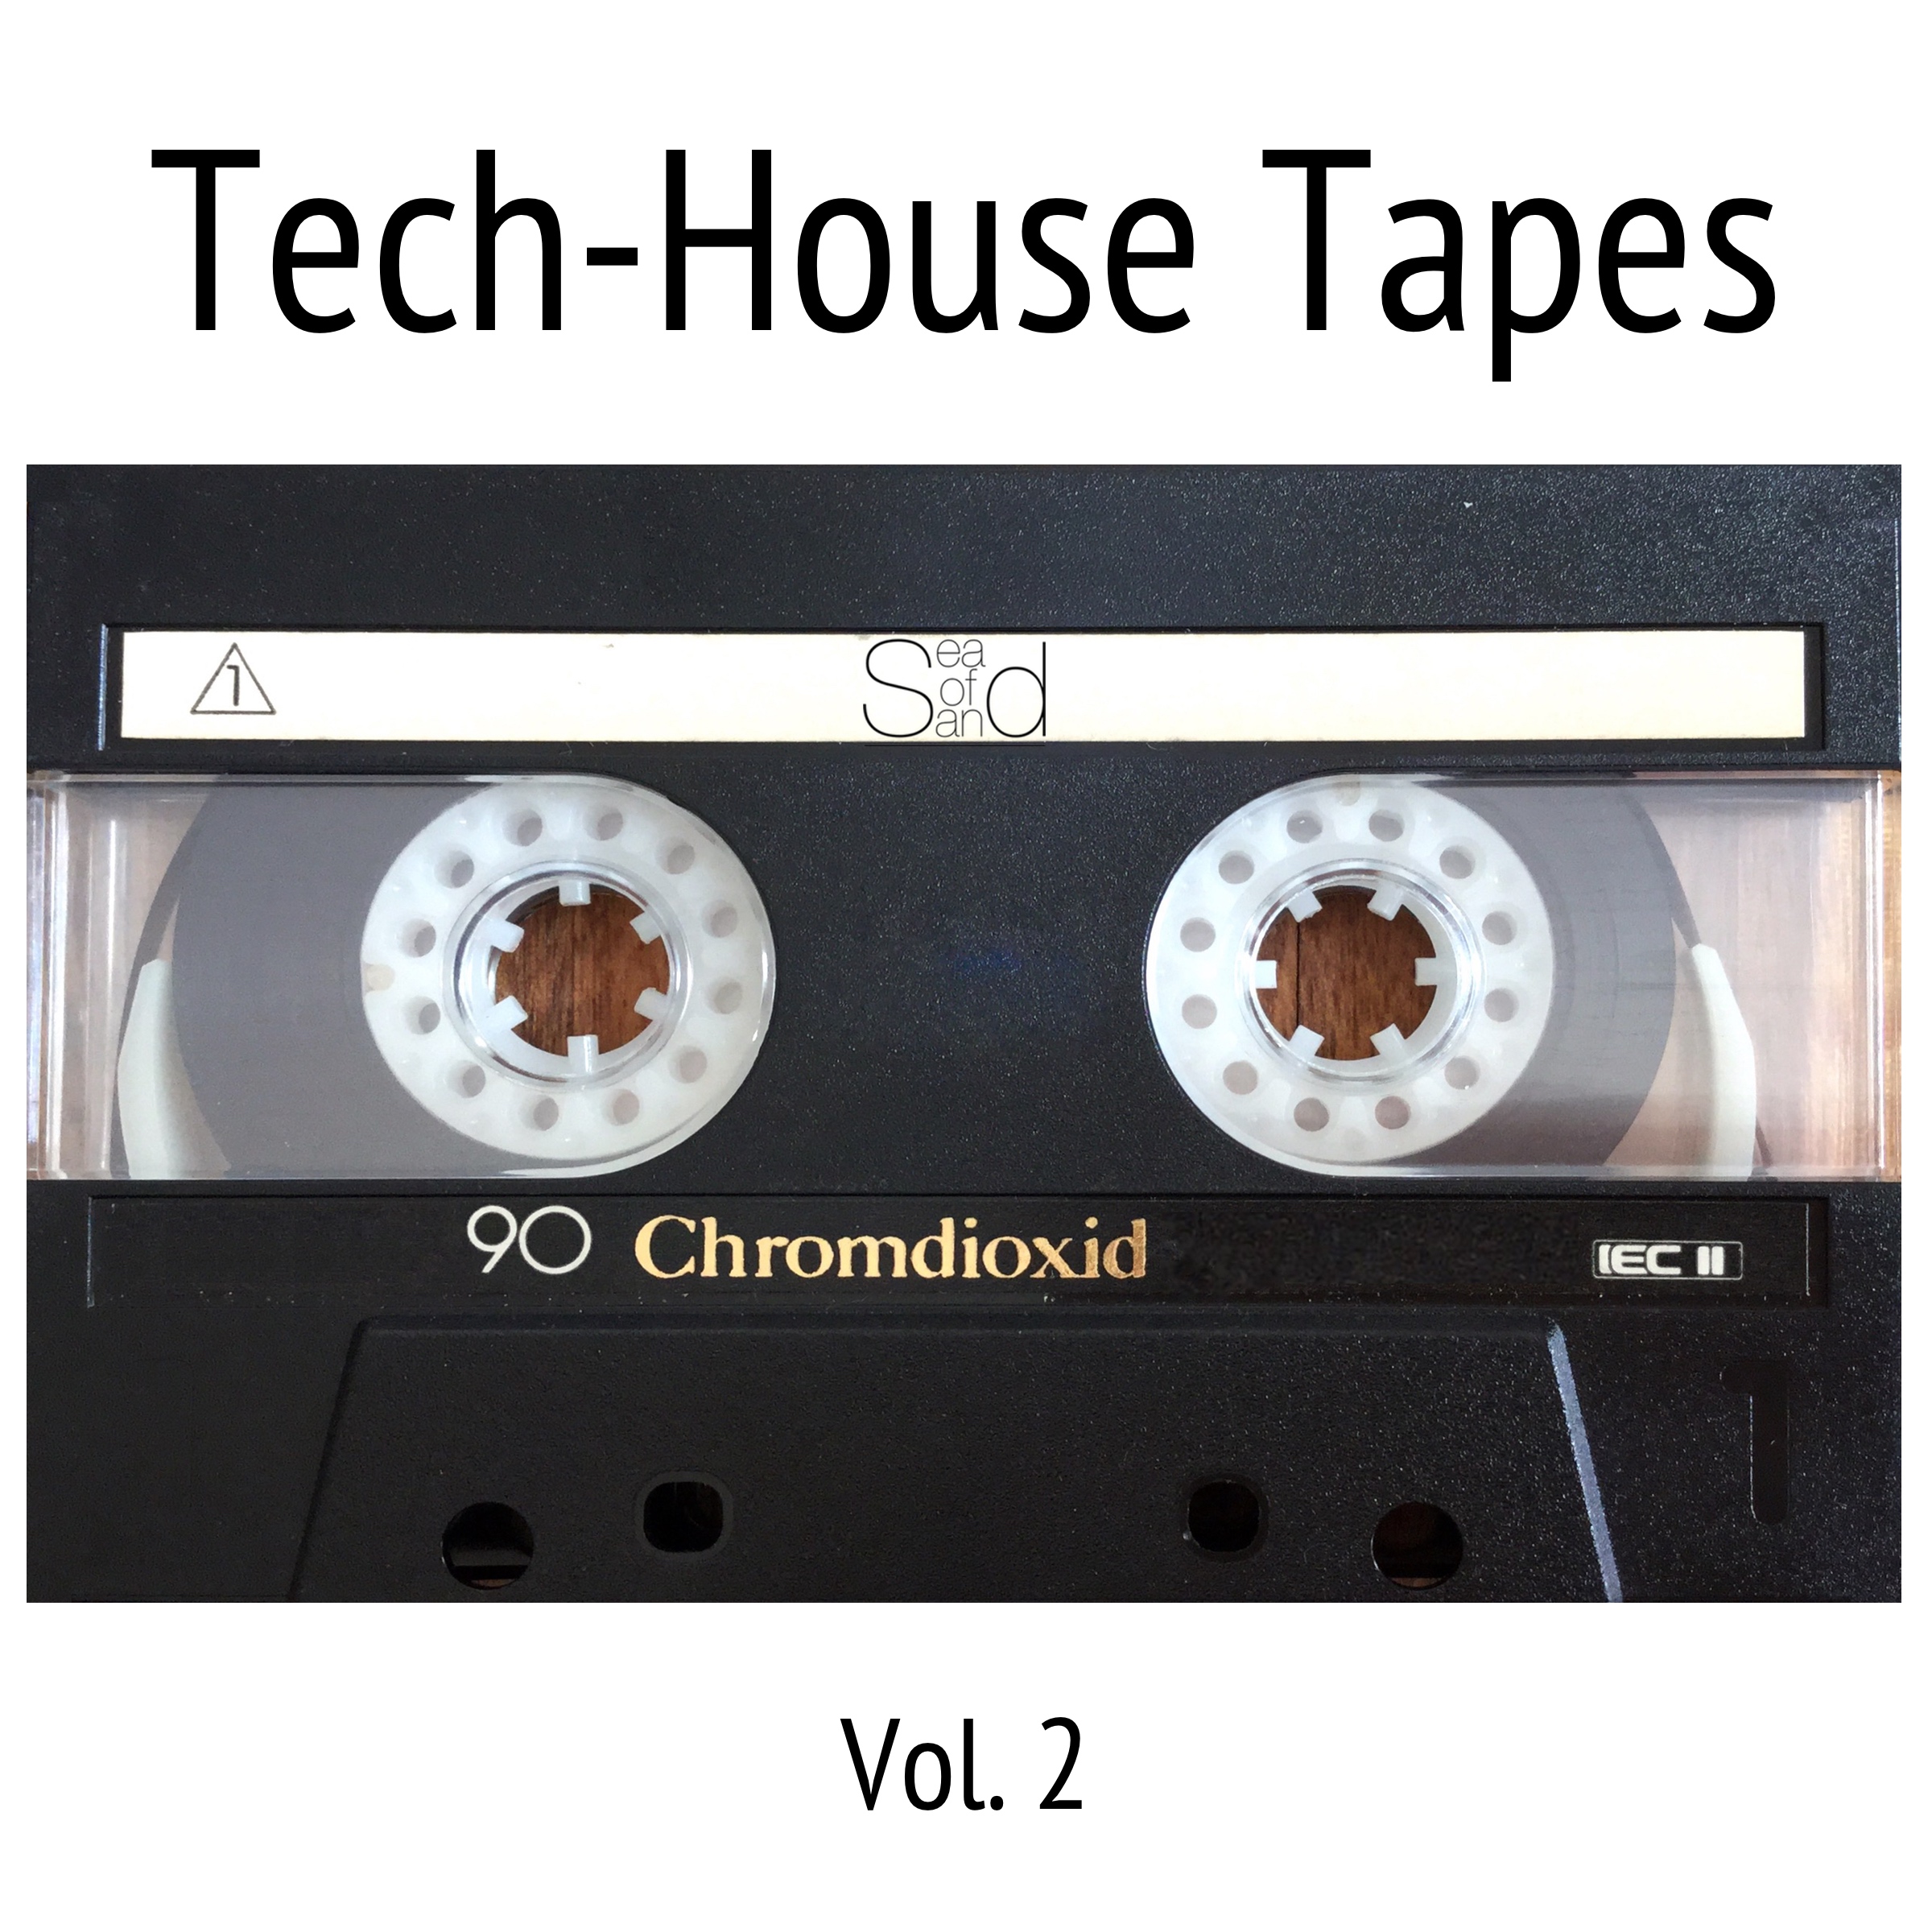 Tech-House Tapes, Vol. 2